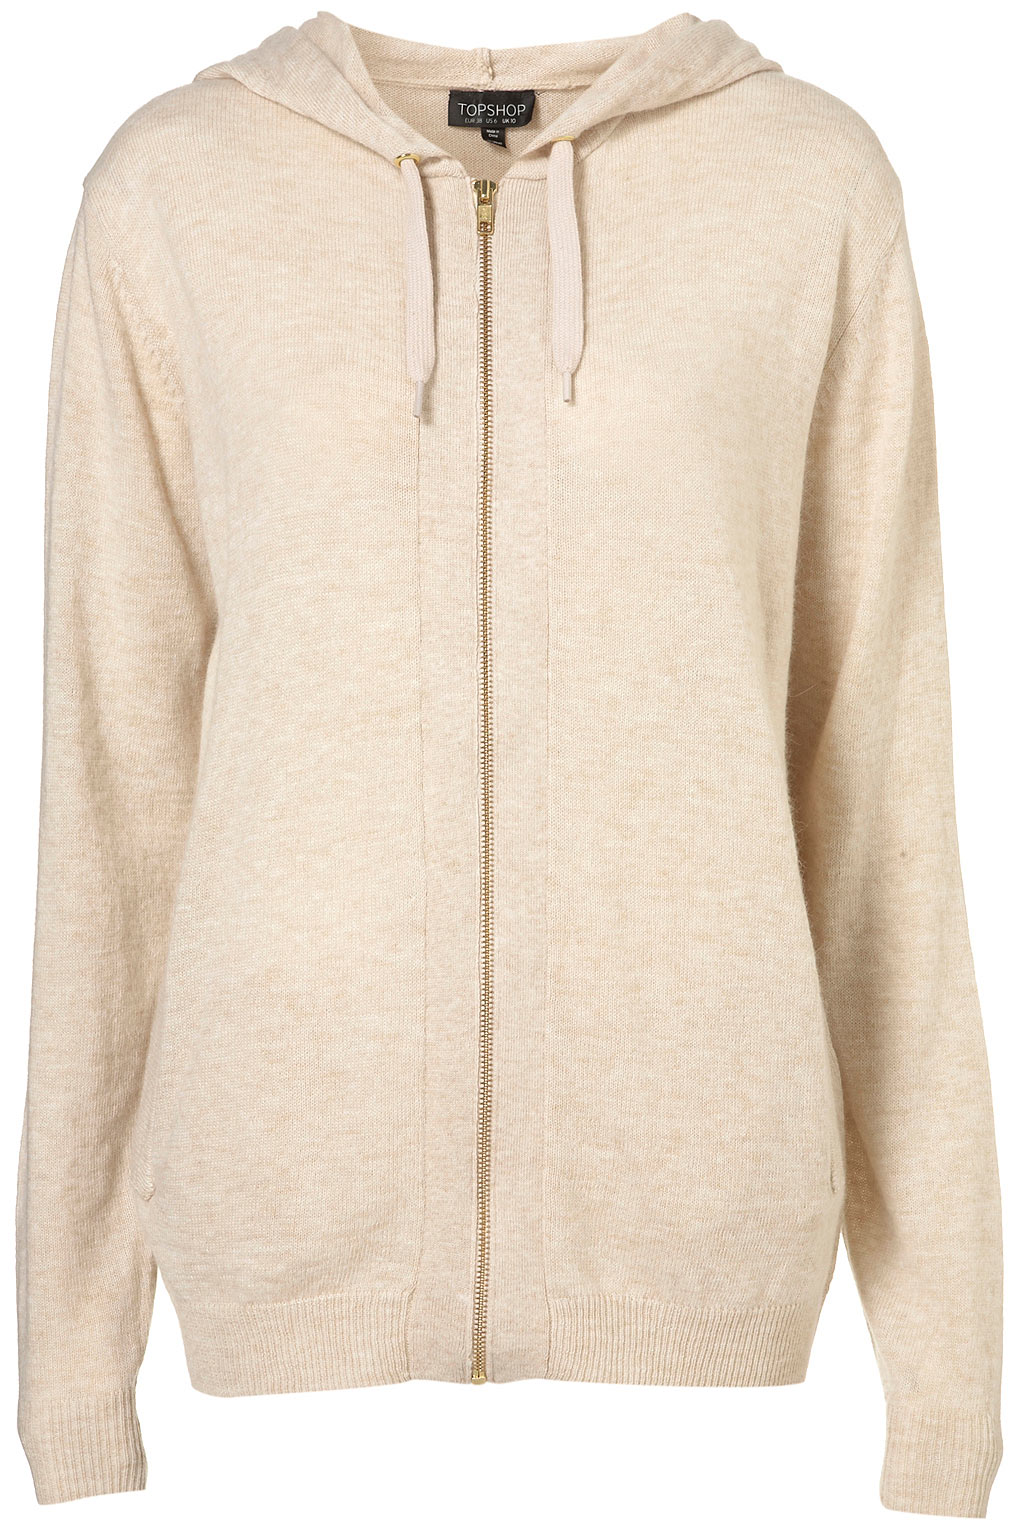 Lyst - Topshop Knitted Zip Up Hoody in Natural